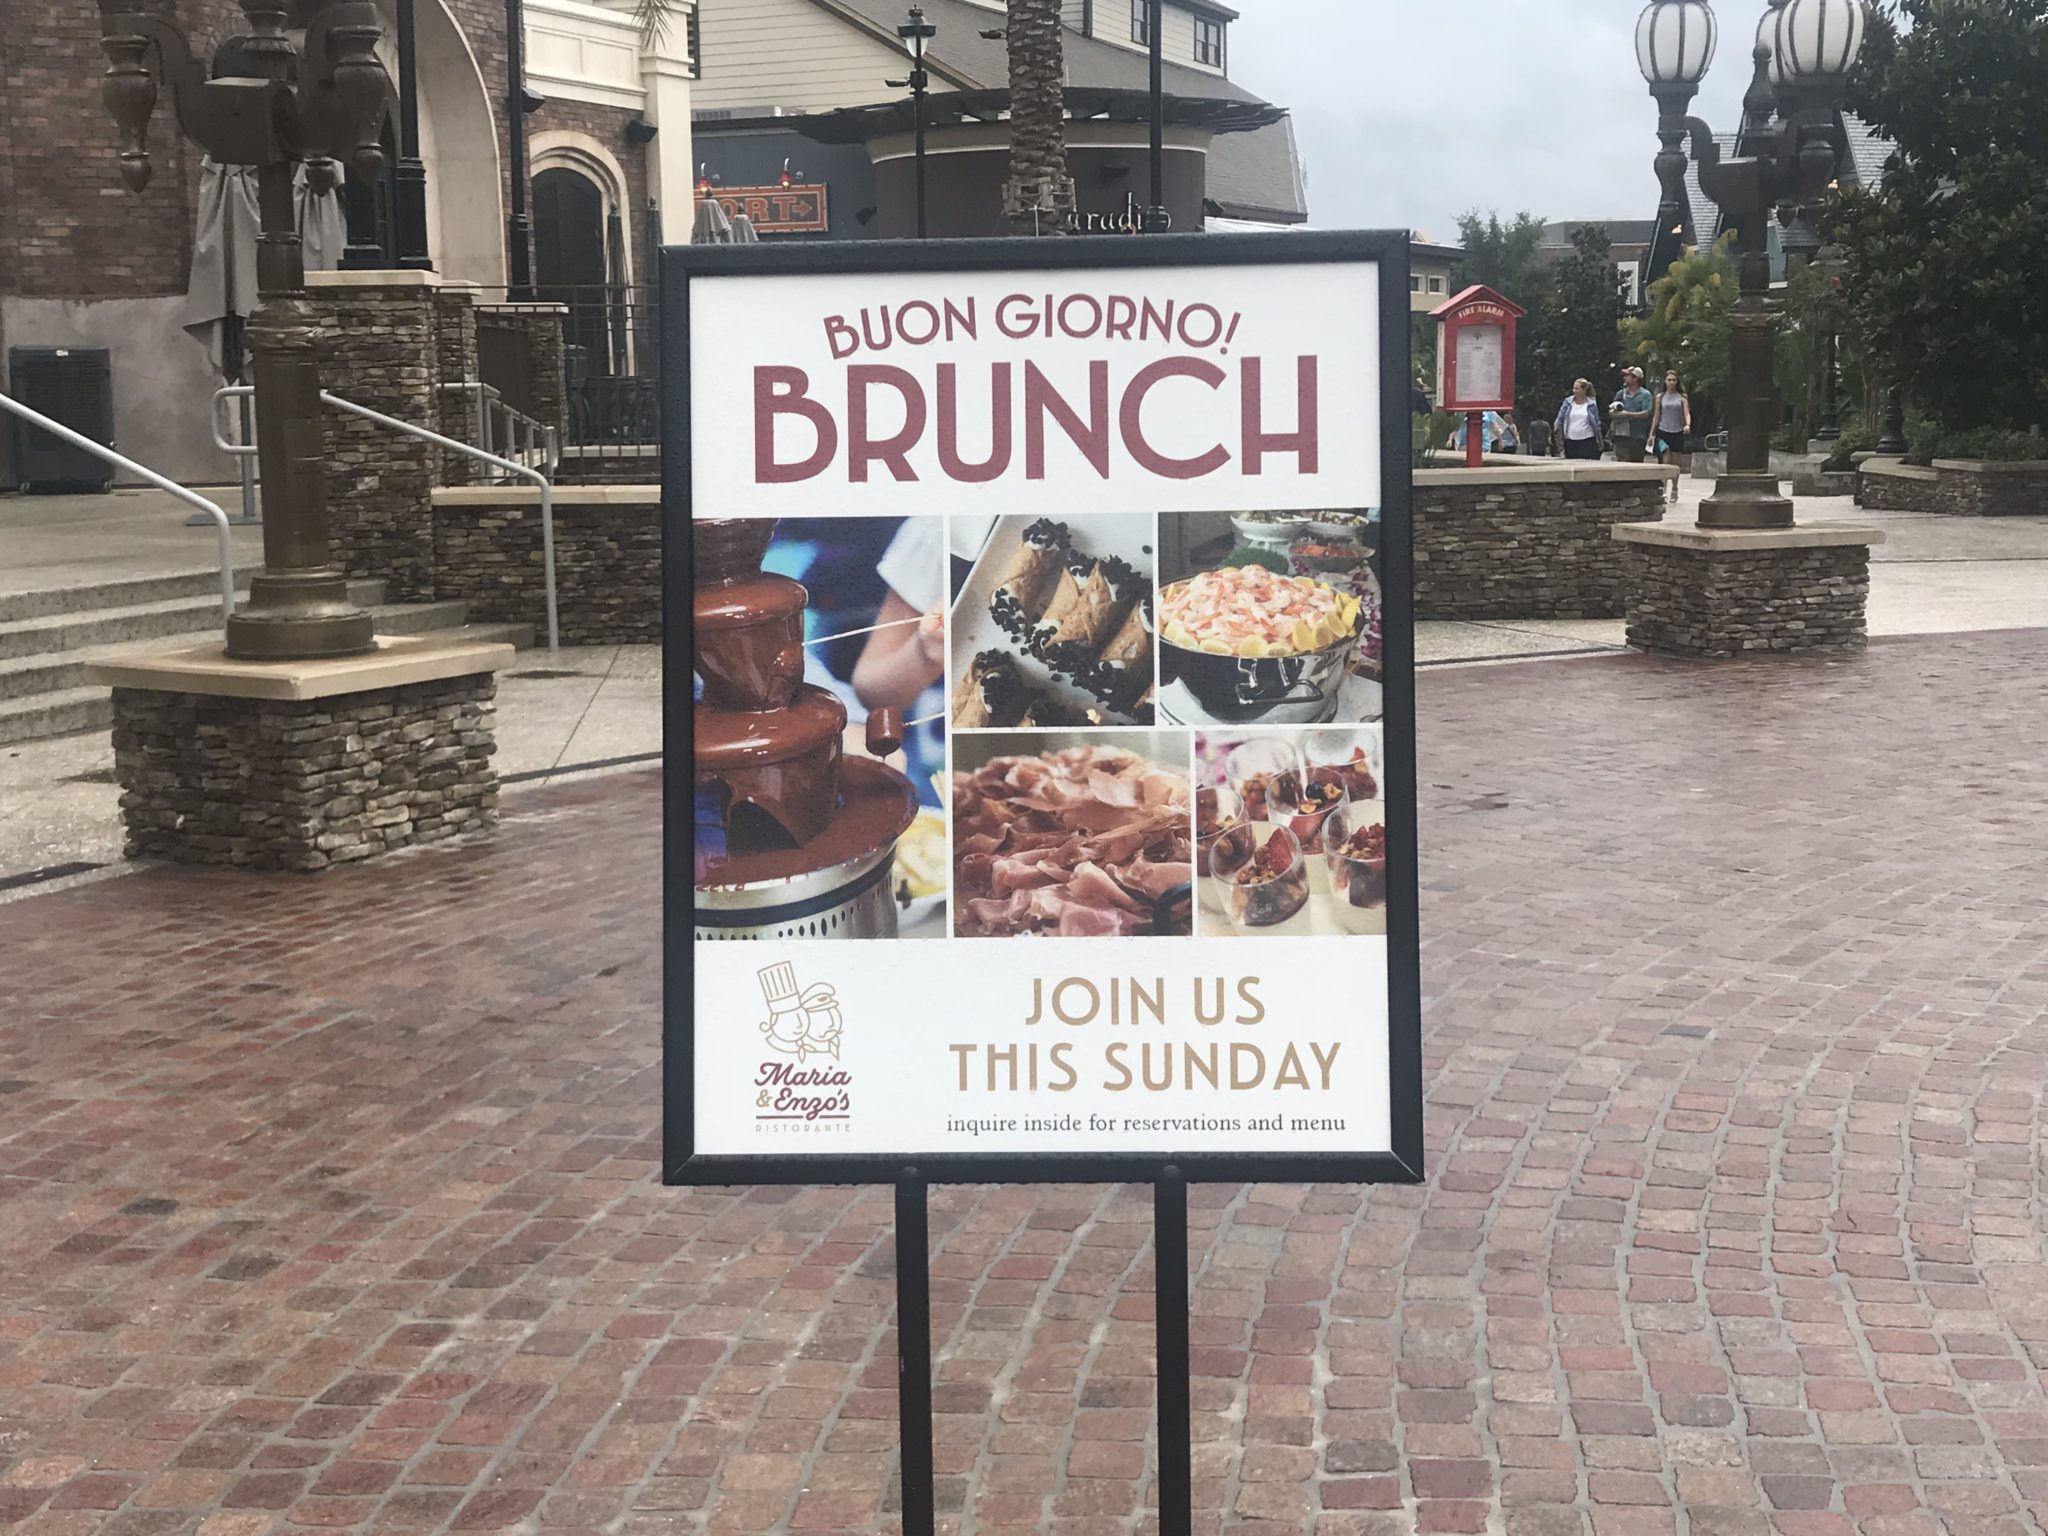 Sunday Brunch at Maria & Enzo’s in Disney Springs is the Perfect Way to Start Your Day!